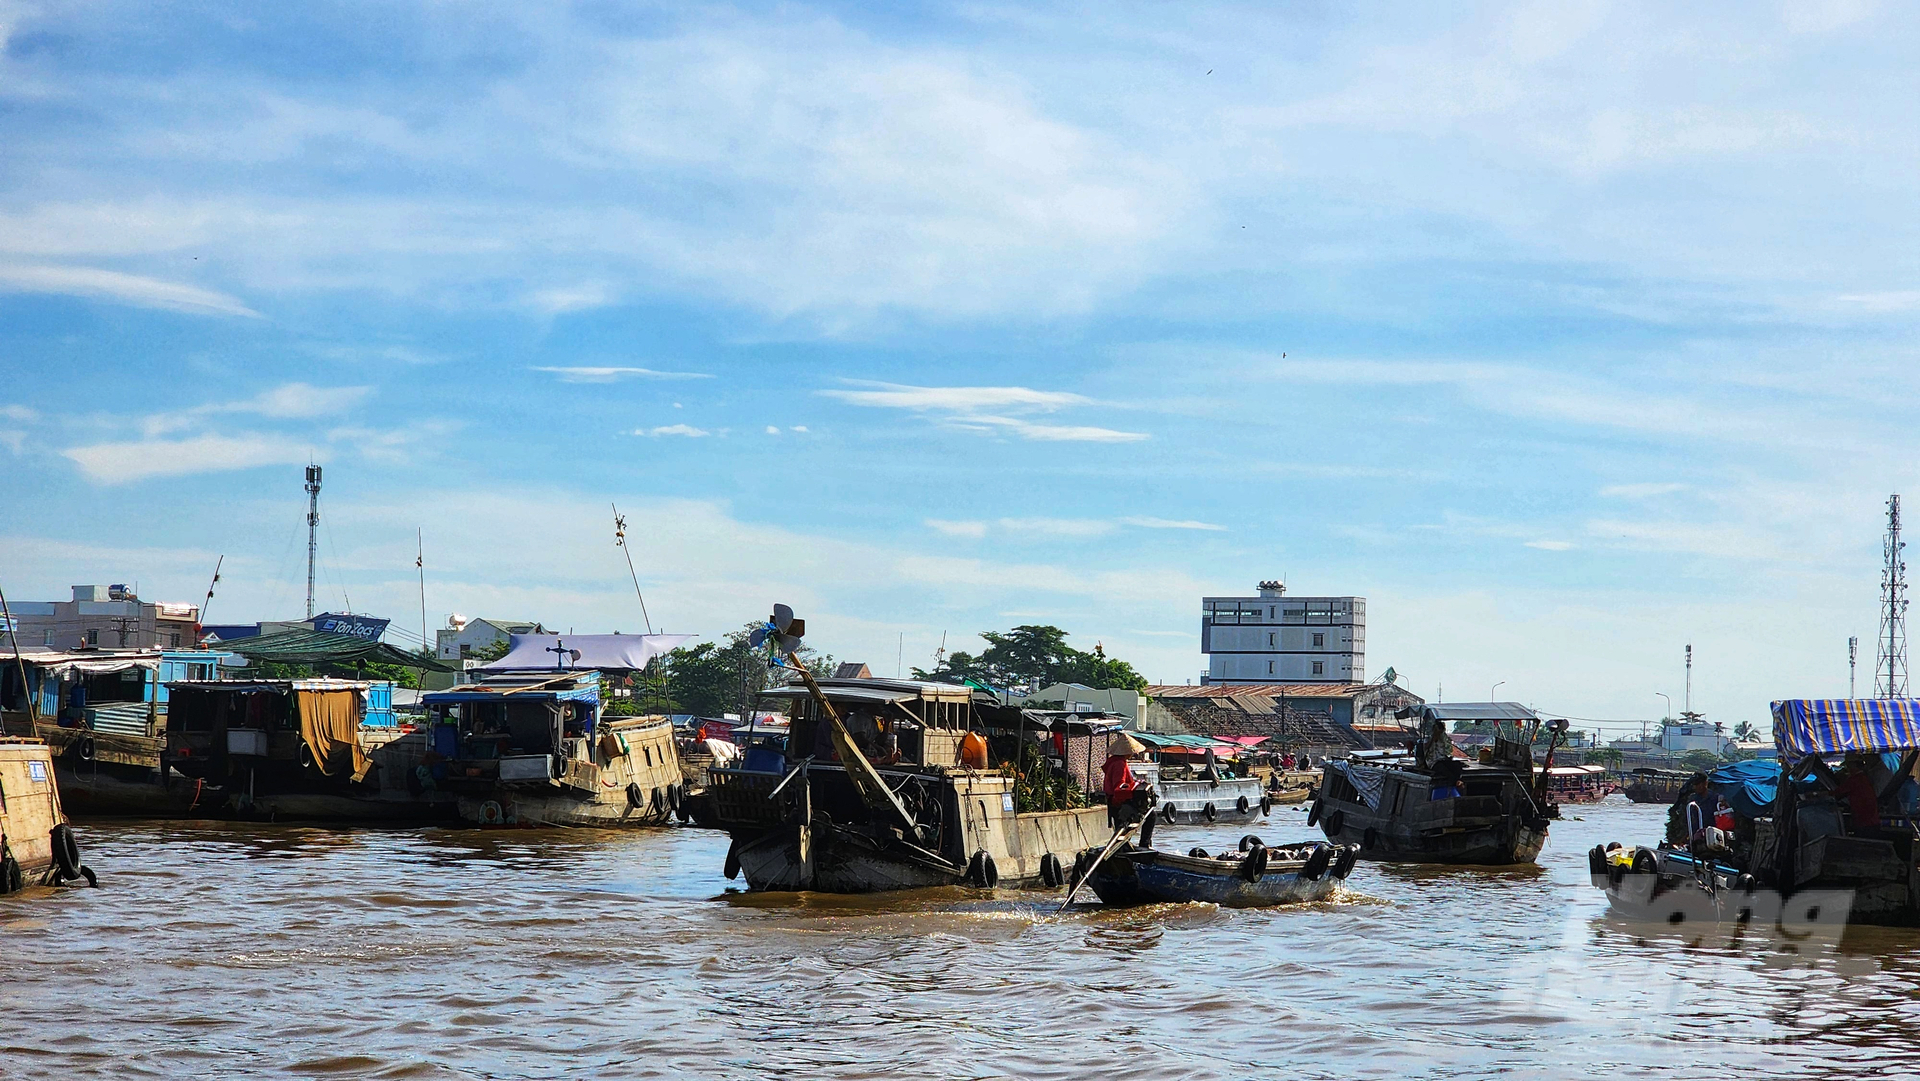 The people of the Mekong Delta adapted to the conditions of rivers and boats, forming a civilization on the wharf and under the boat. Photo: Kim Anh.